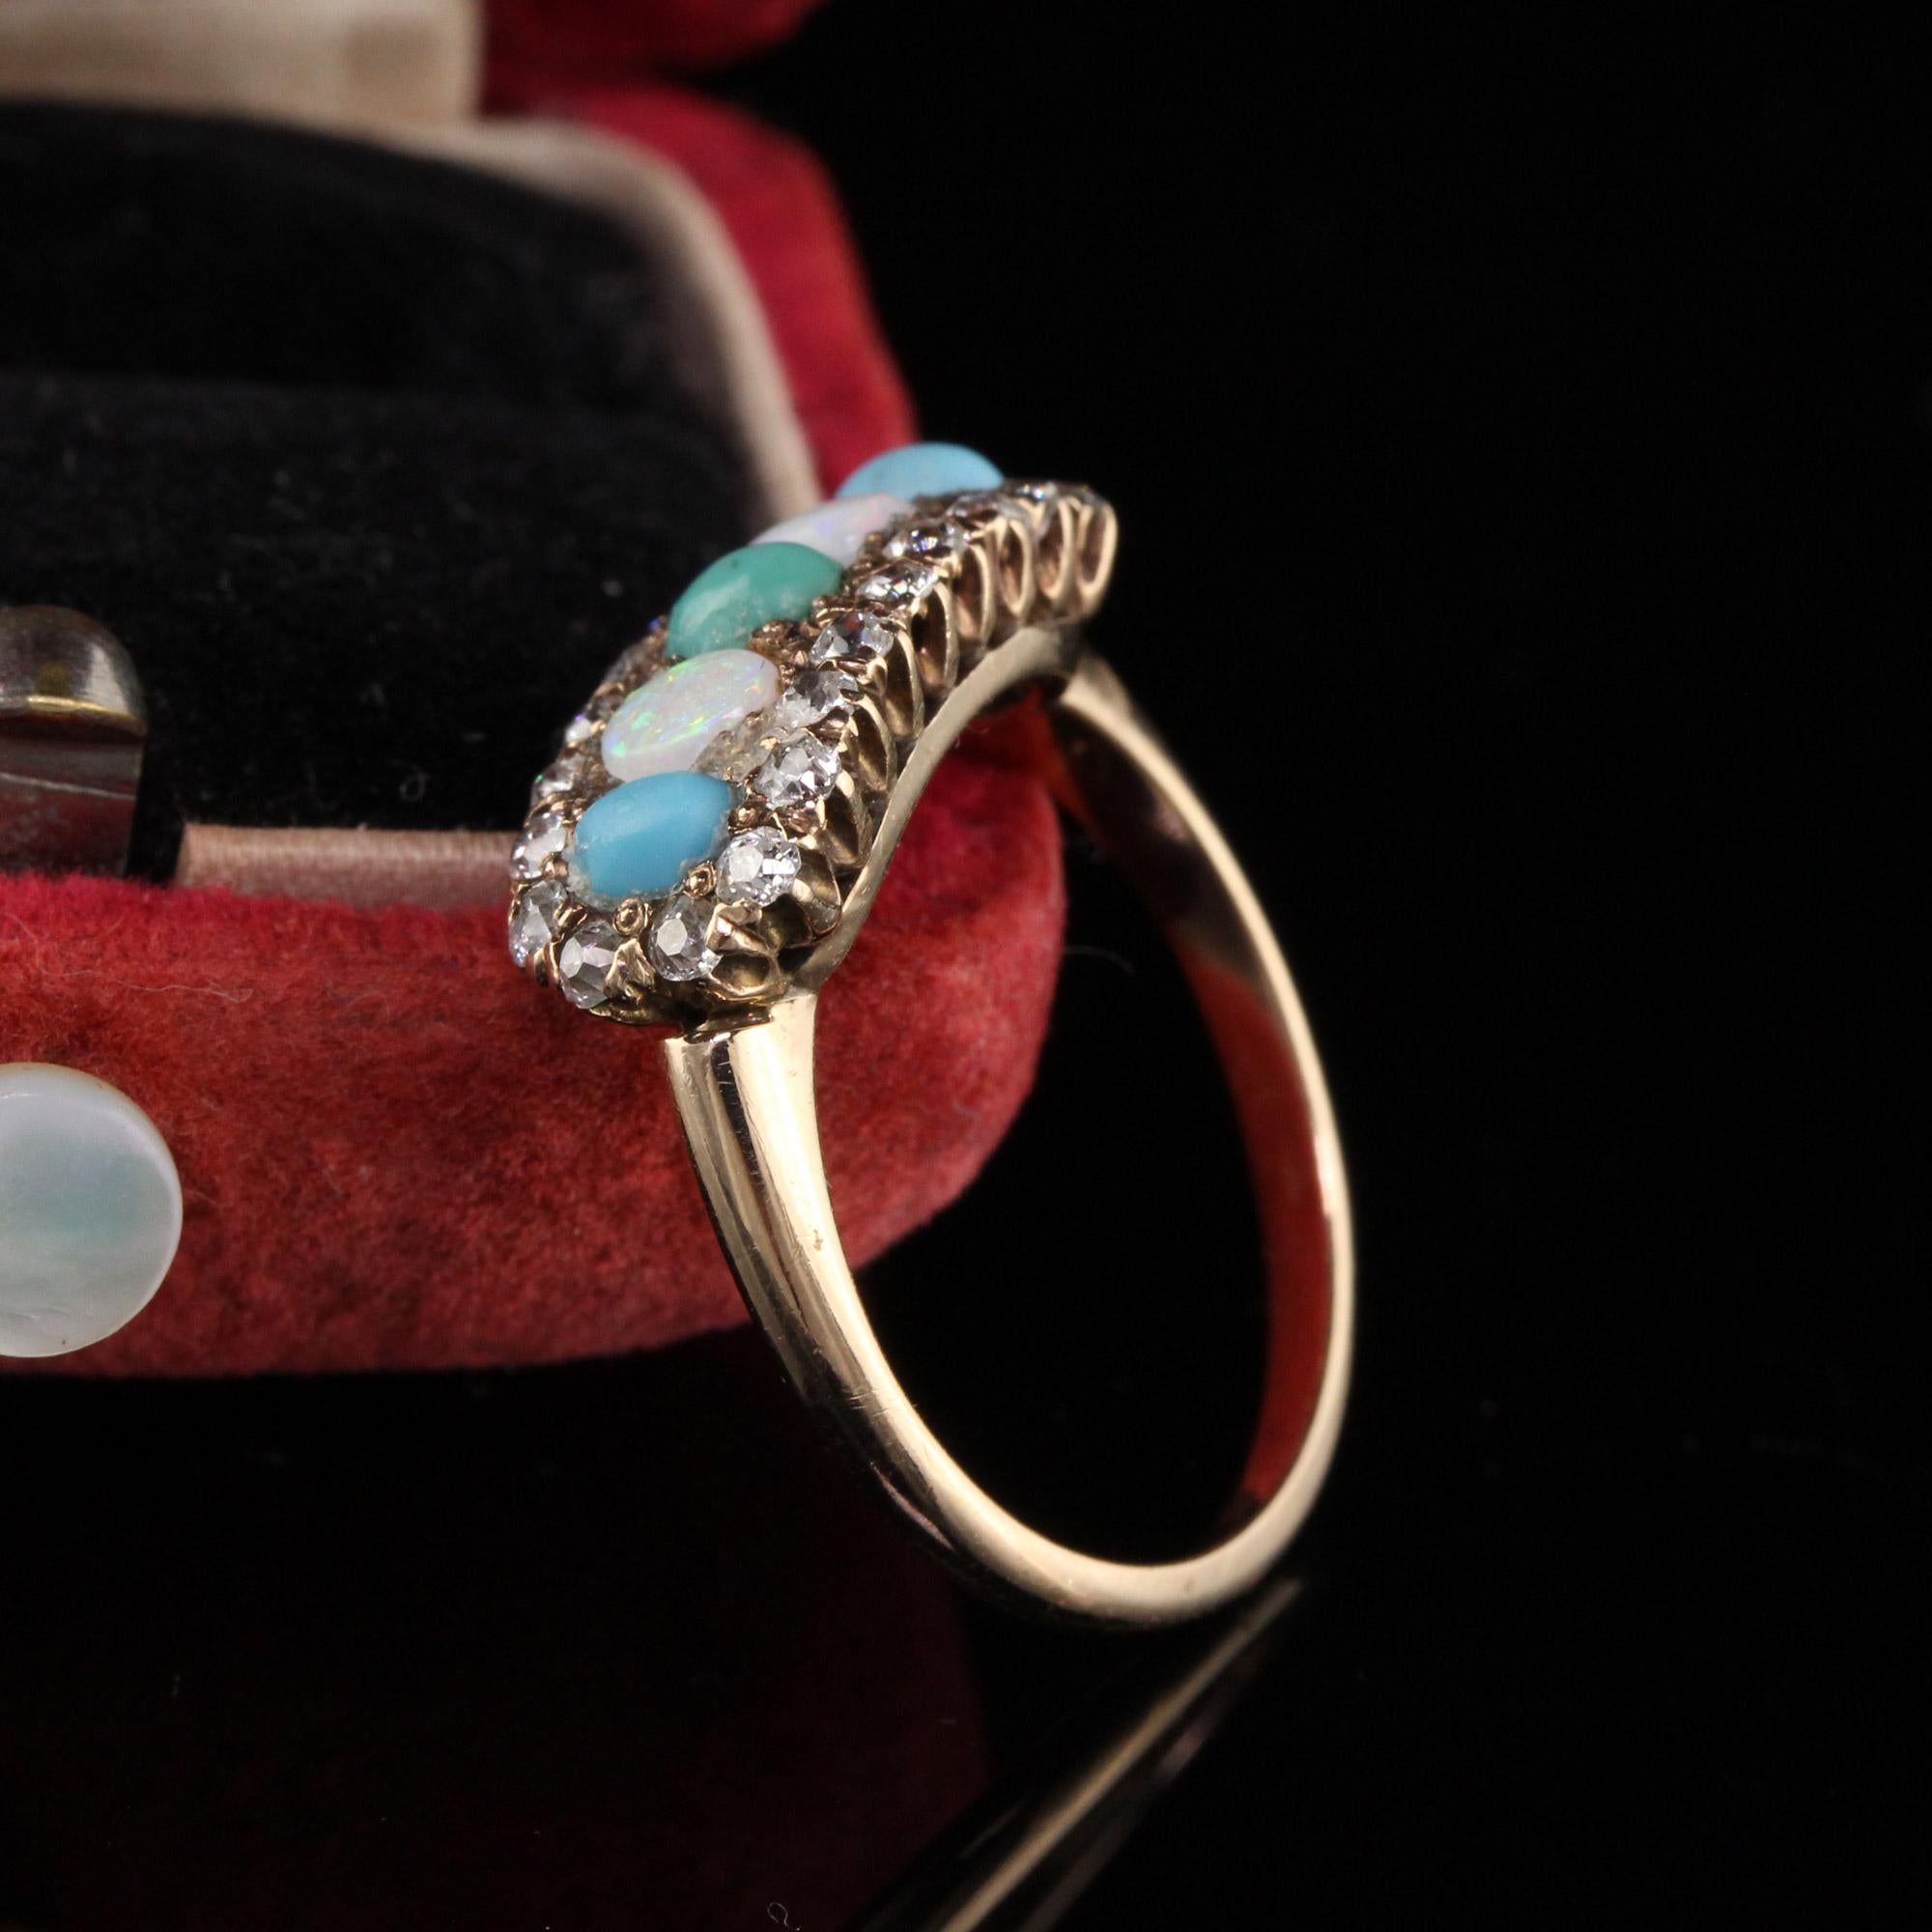 Stunning antique victorian ring with old mine cut diamonds, opal and turquoise. 

Item #R0521

Metal: 14K Yellow Gold

Weight: 3.1 Grams

Total Diamond Weight: Approximately 0.65 cts

Diamond Color: H

Diamond Clarity: VS2

Ring Size: 6.5

This ring